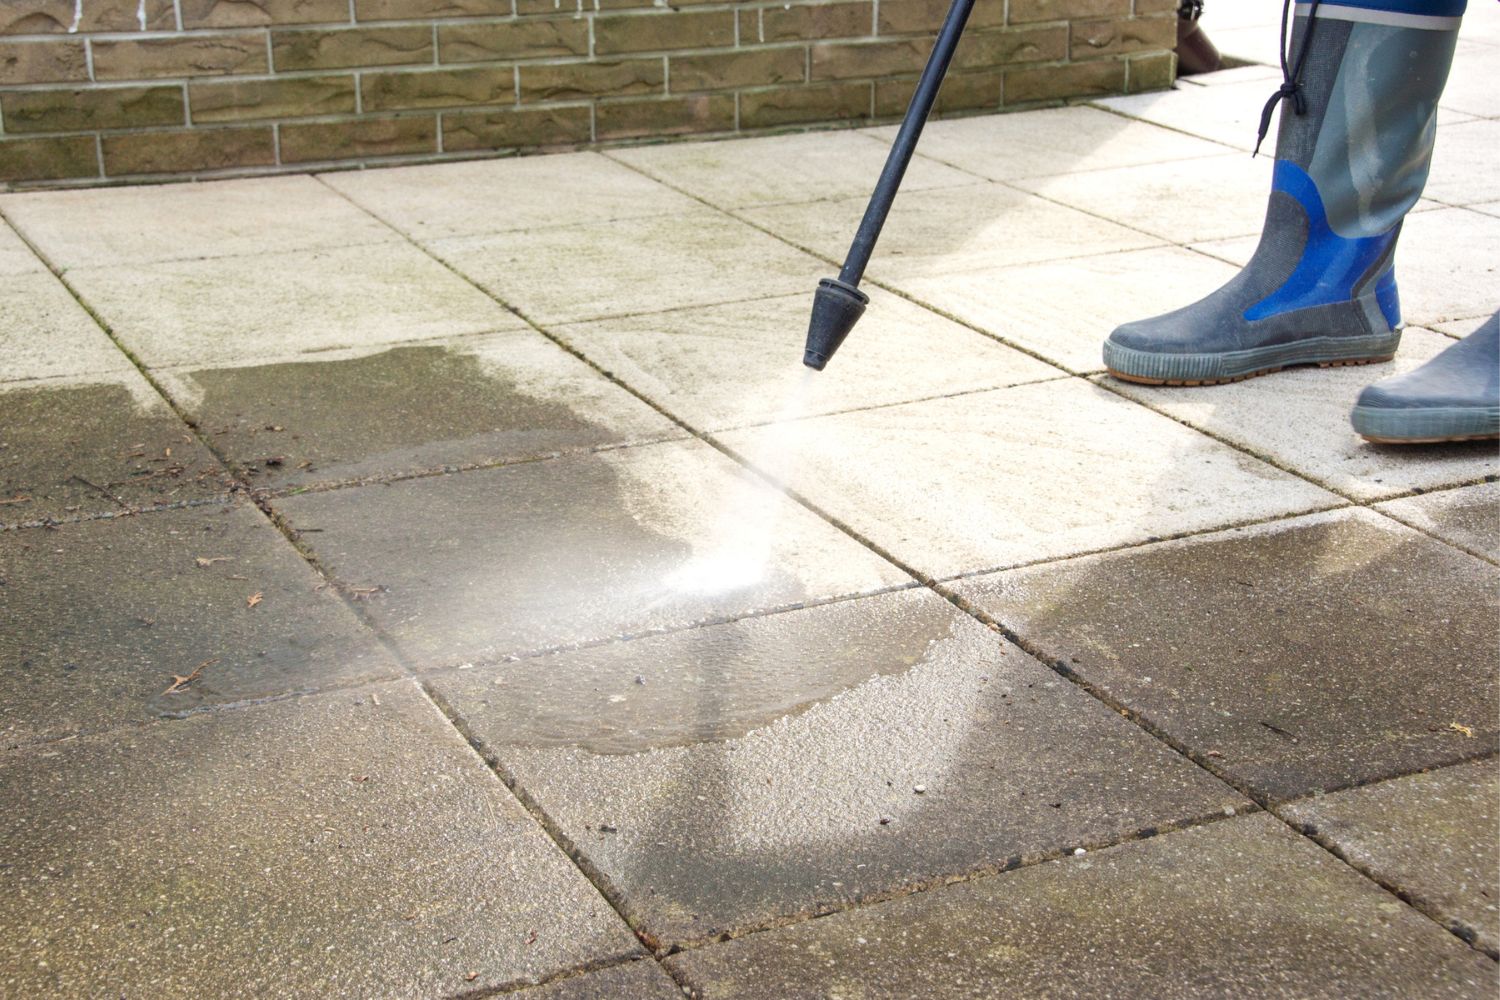 A close up of a person pressure washing a patio.